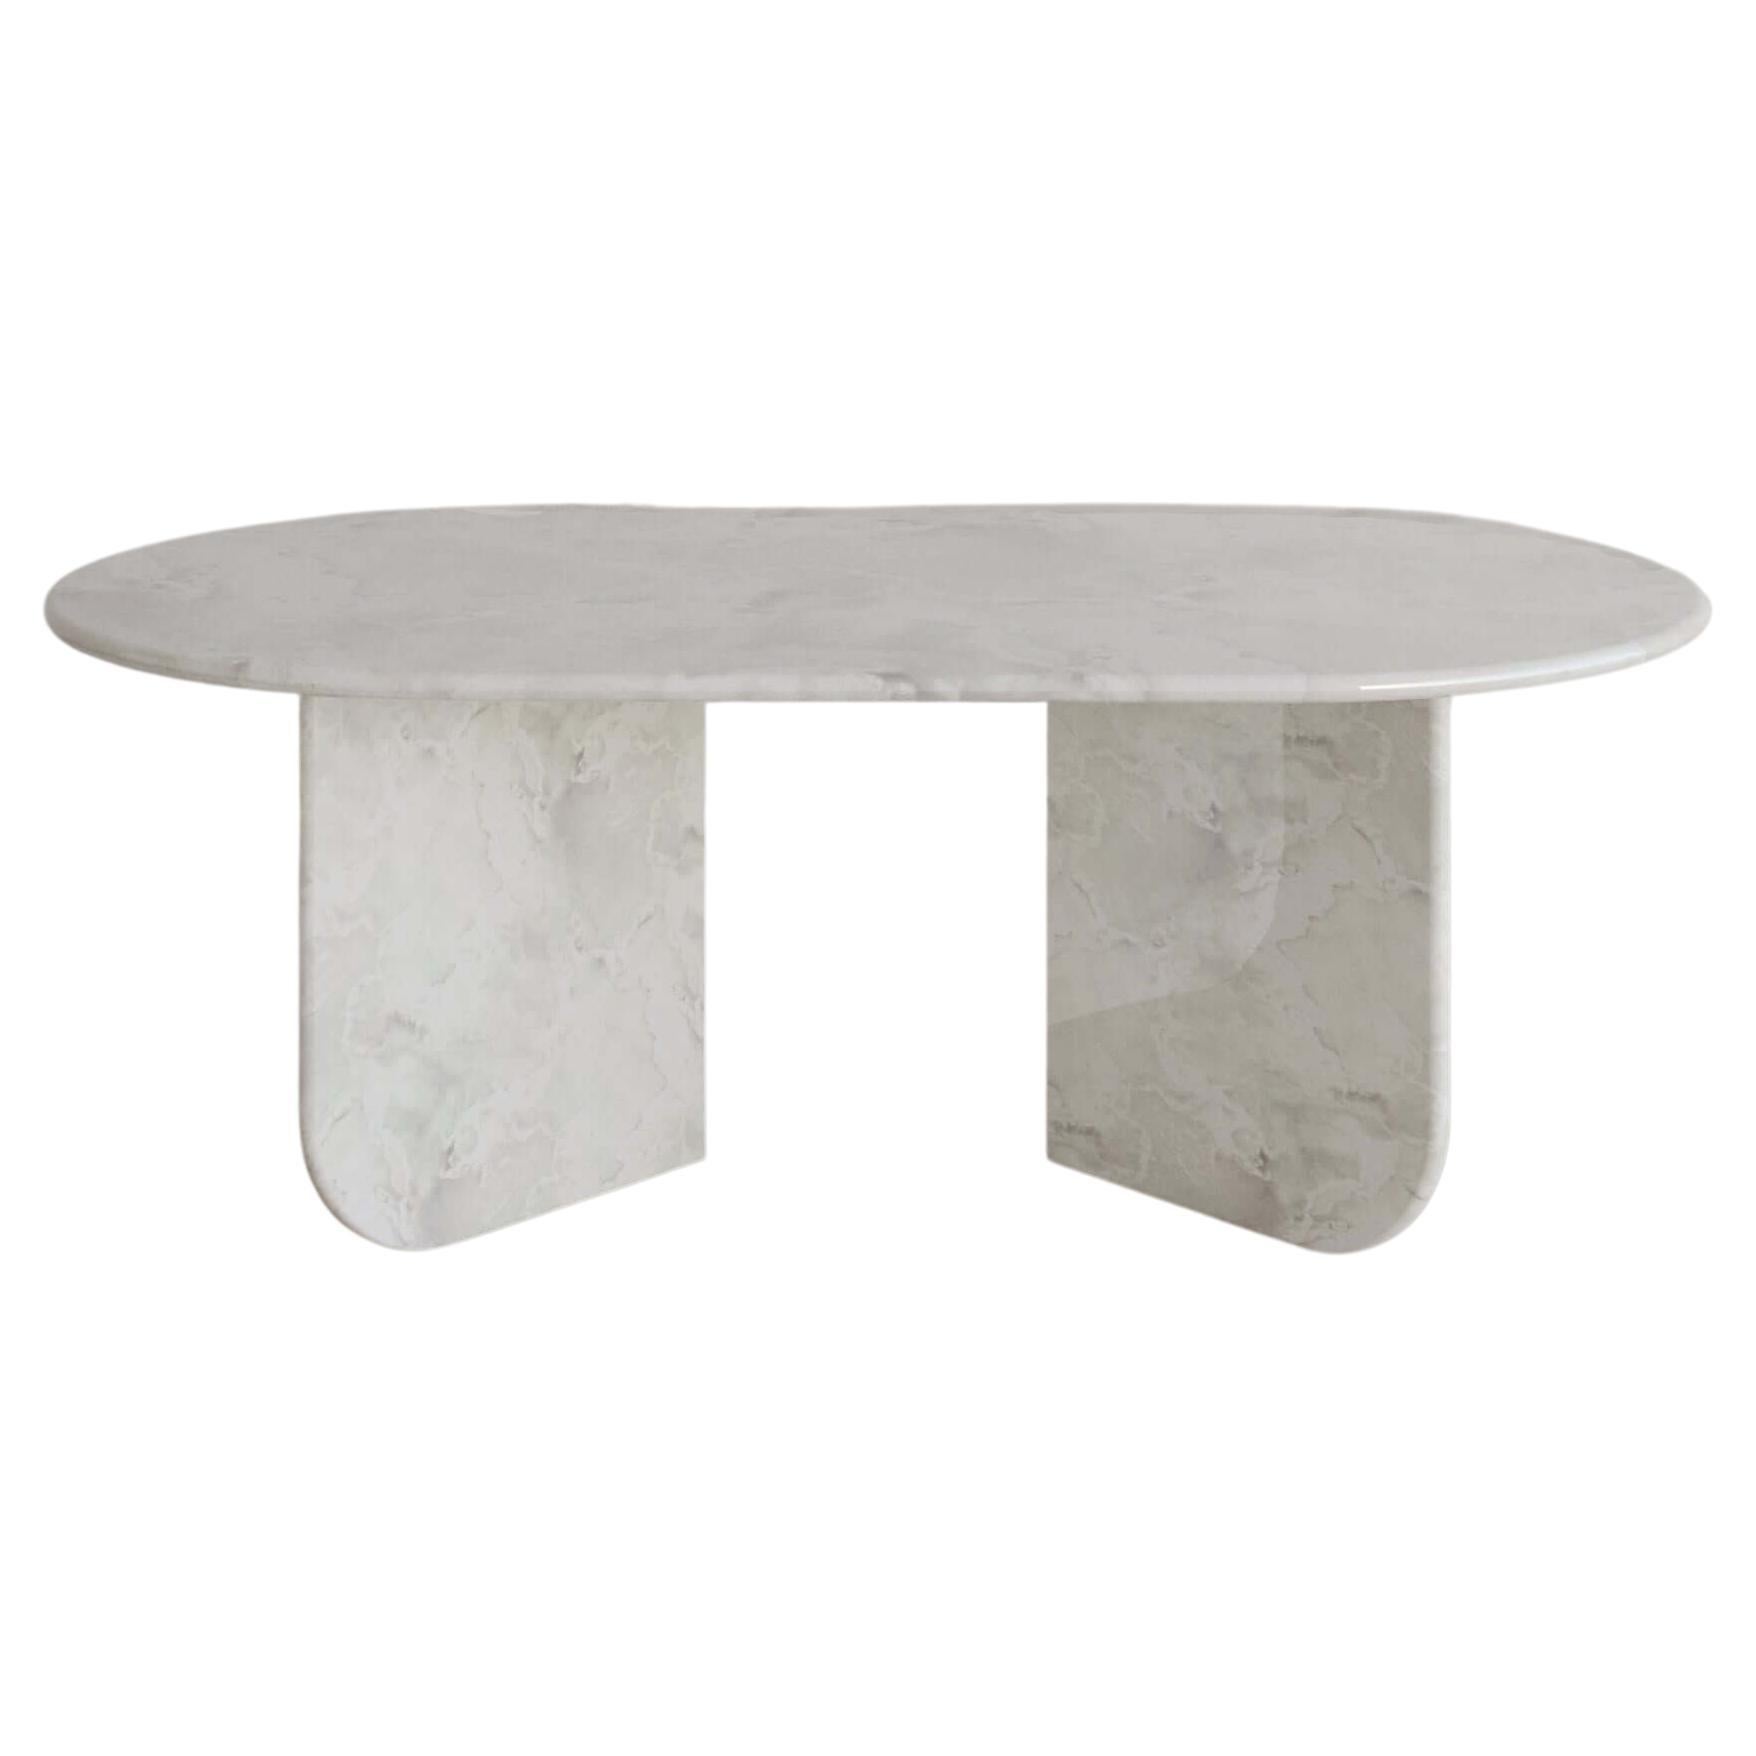 Bianco Onyx Ètoile Coffee Table i by the Essentialist For Sale